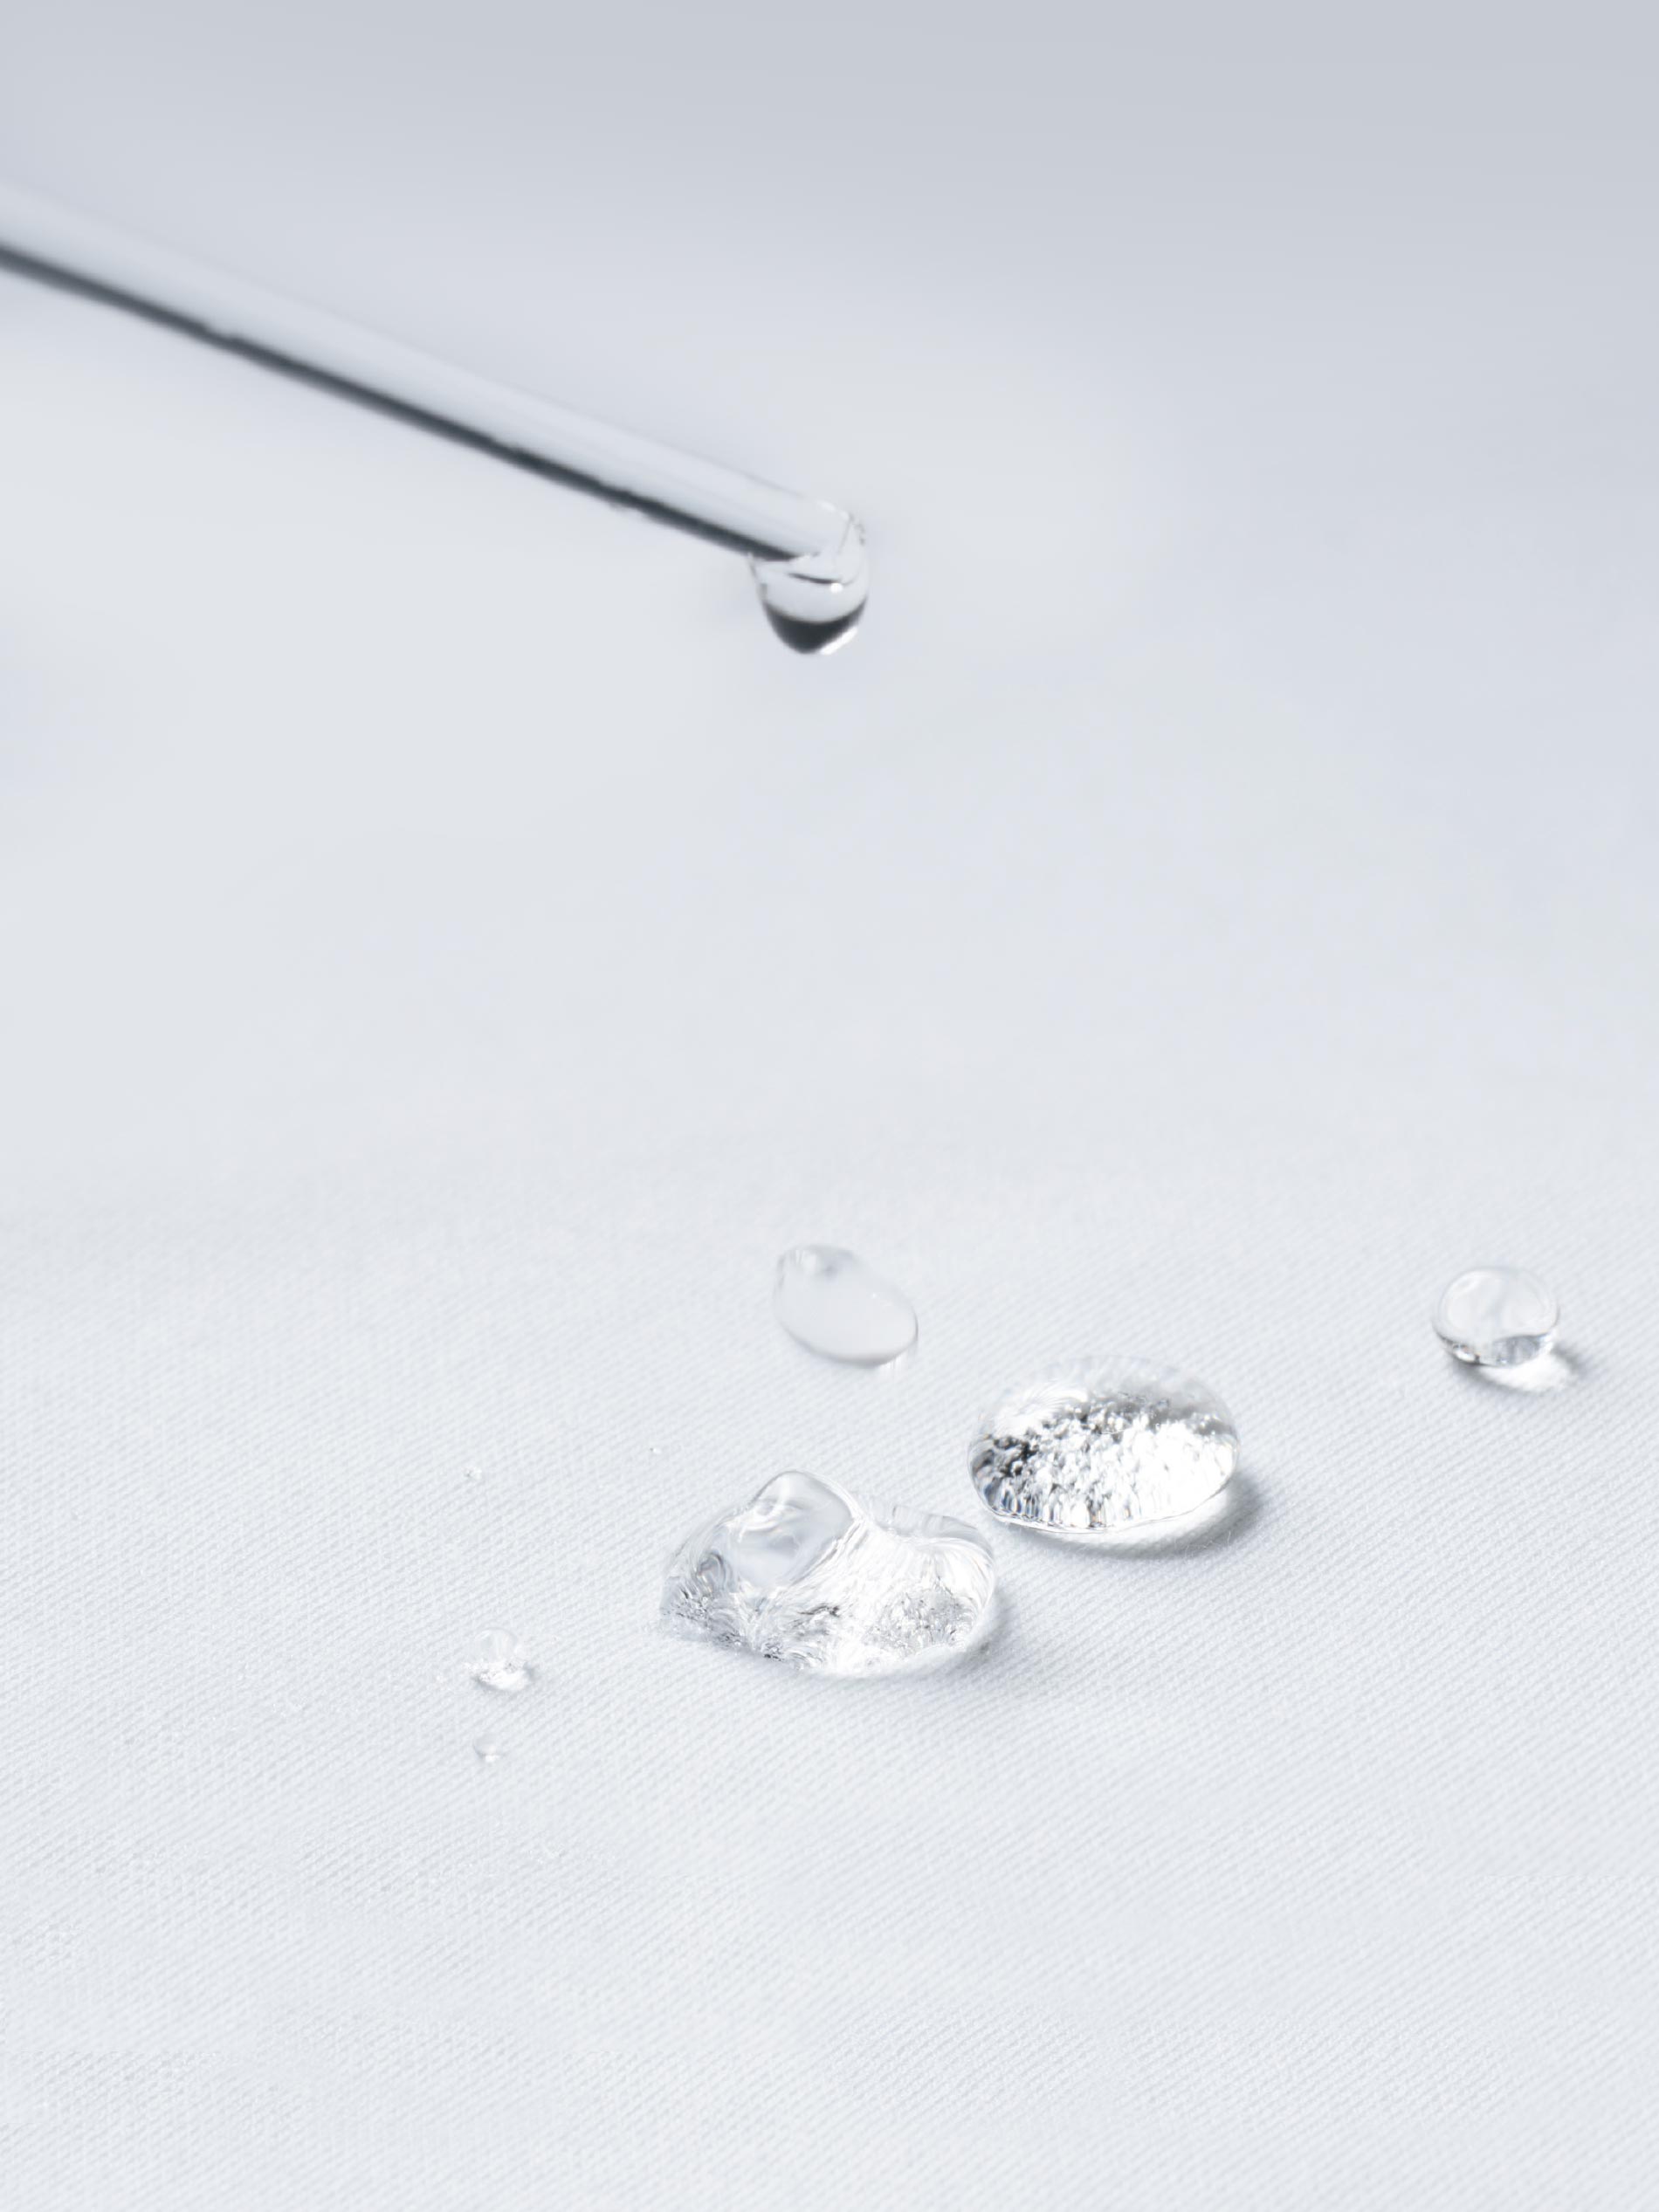 fabric layer with hydrophobic properties: water droplets are dripped onto white fabric from a pipette; they remain on the surface and are not absorbed by the fabric | mey®